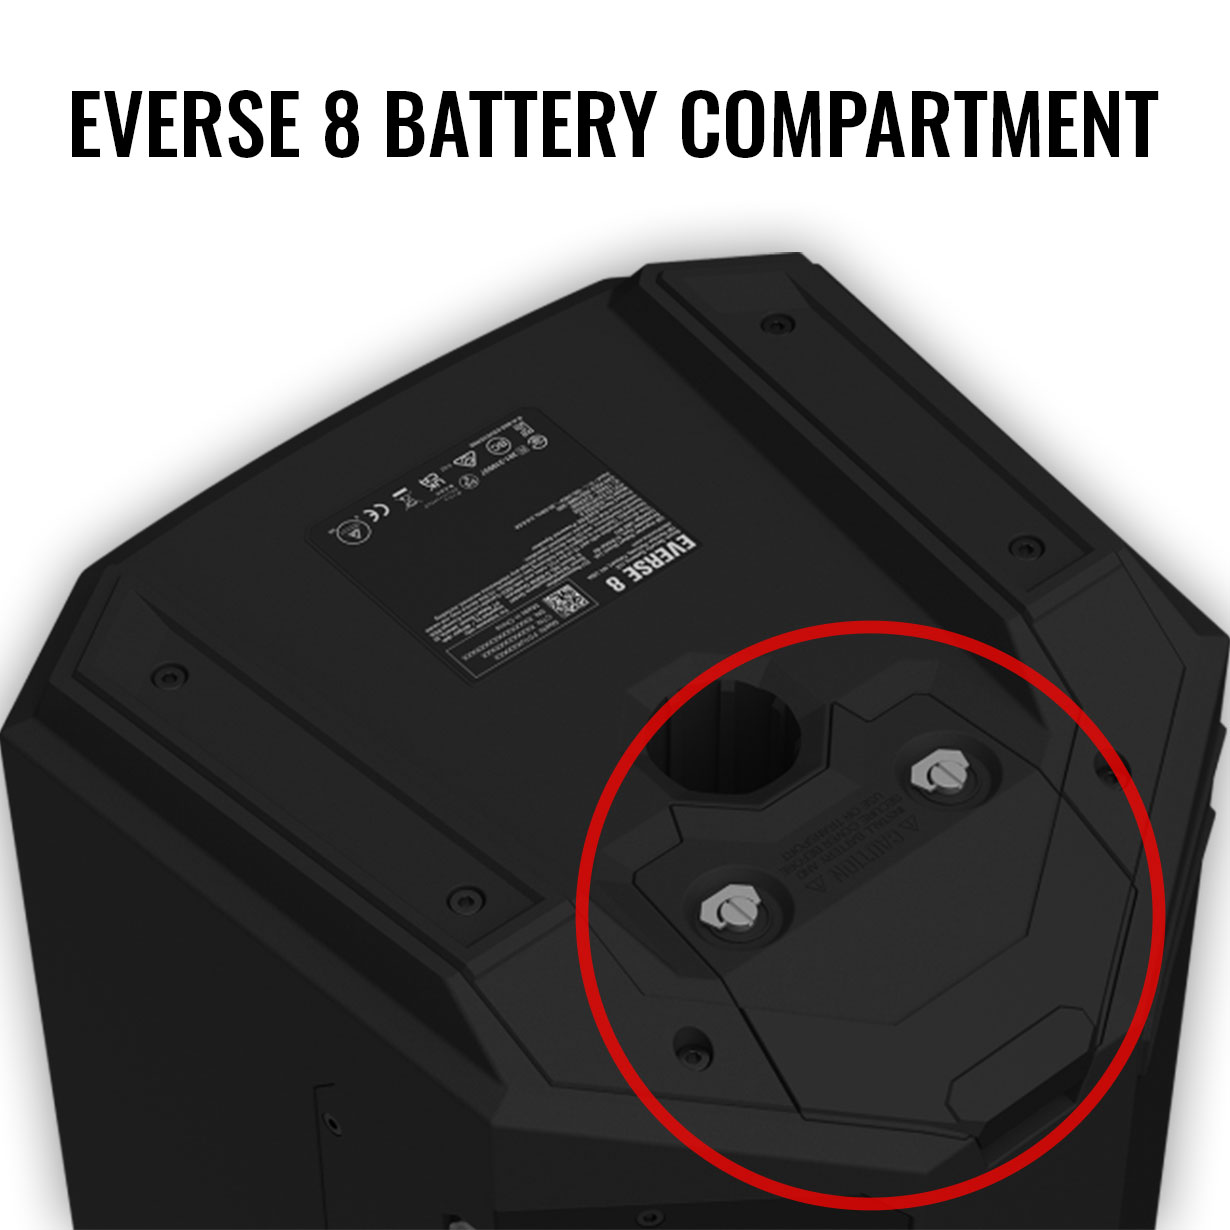 everse-8-battery-compartment.jpg